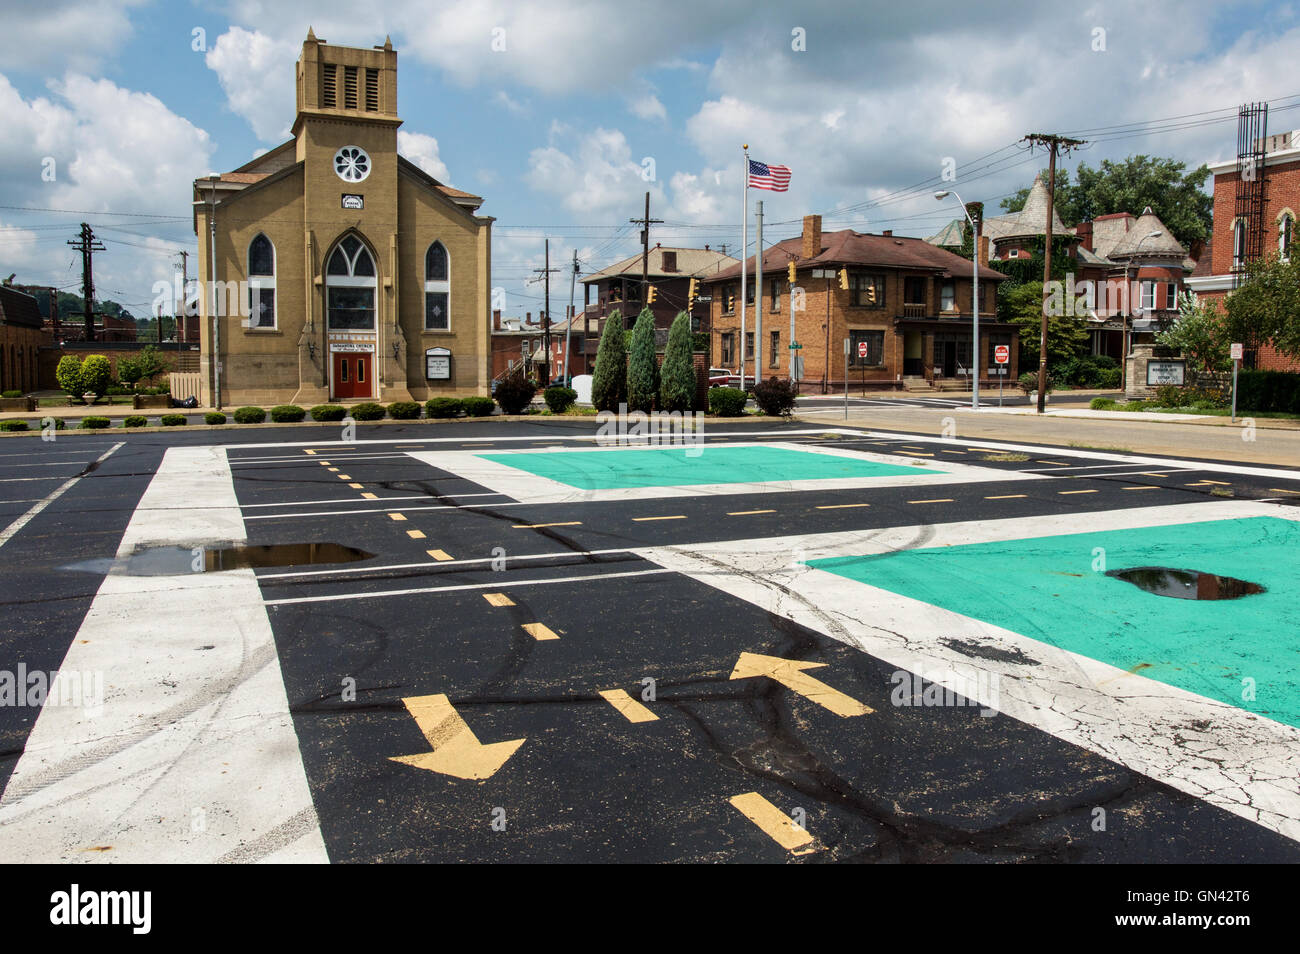 Arrows point in opposing directions in a parking lot next to a historic church in Zanesville, Ohio. Stock Photo